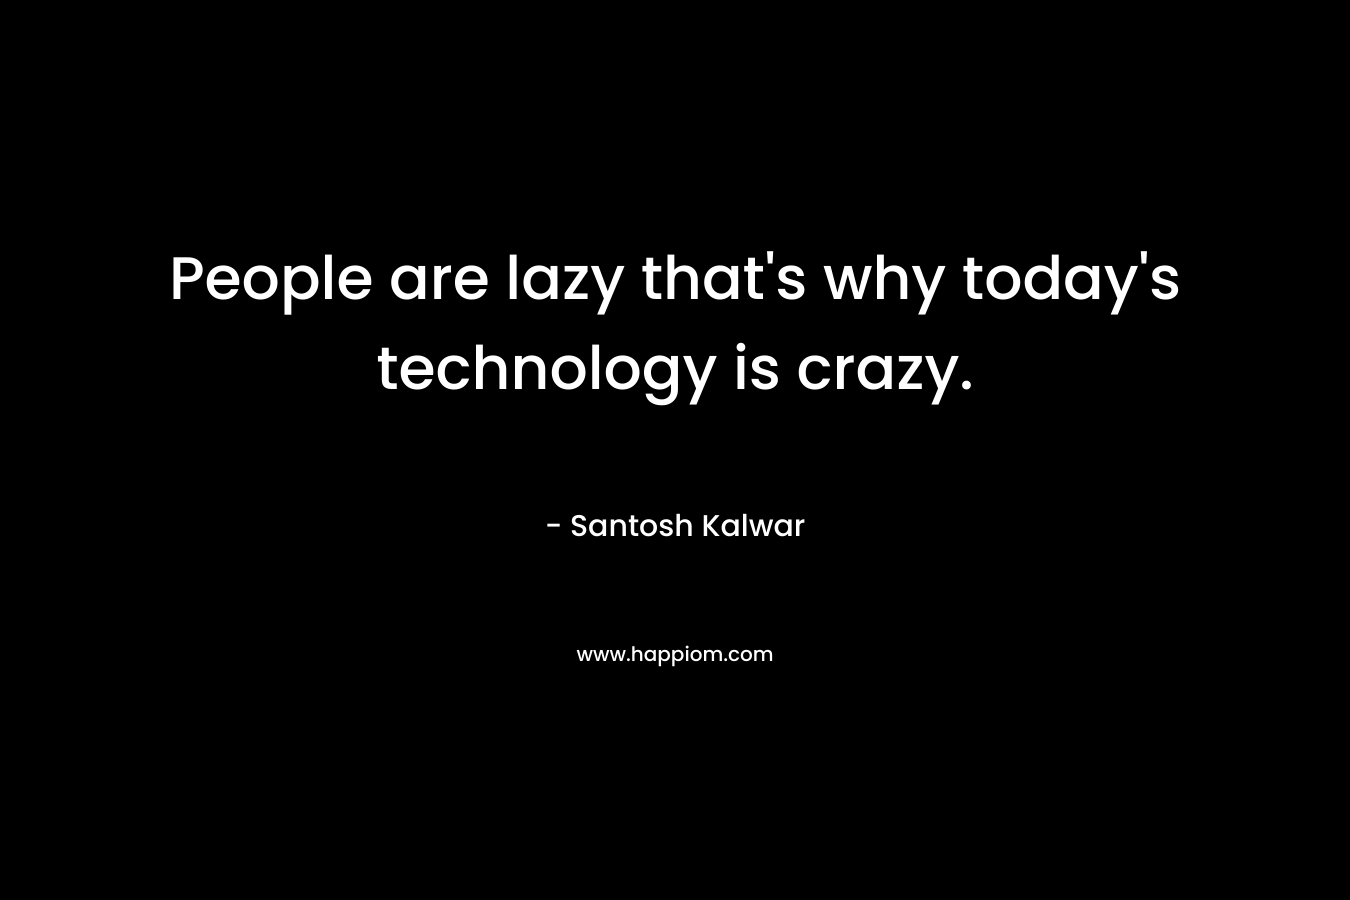 People are lazy that's why today's technology is crazy.